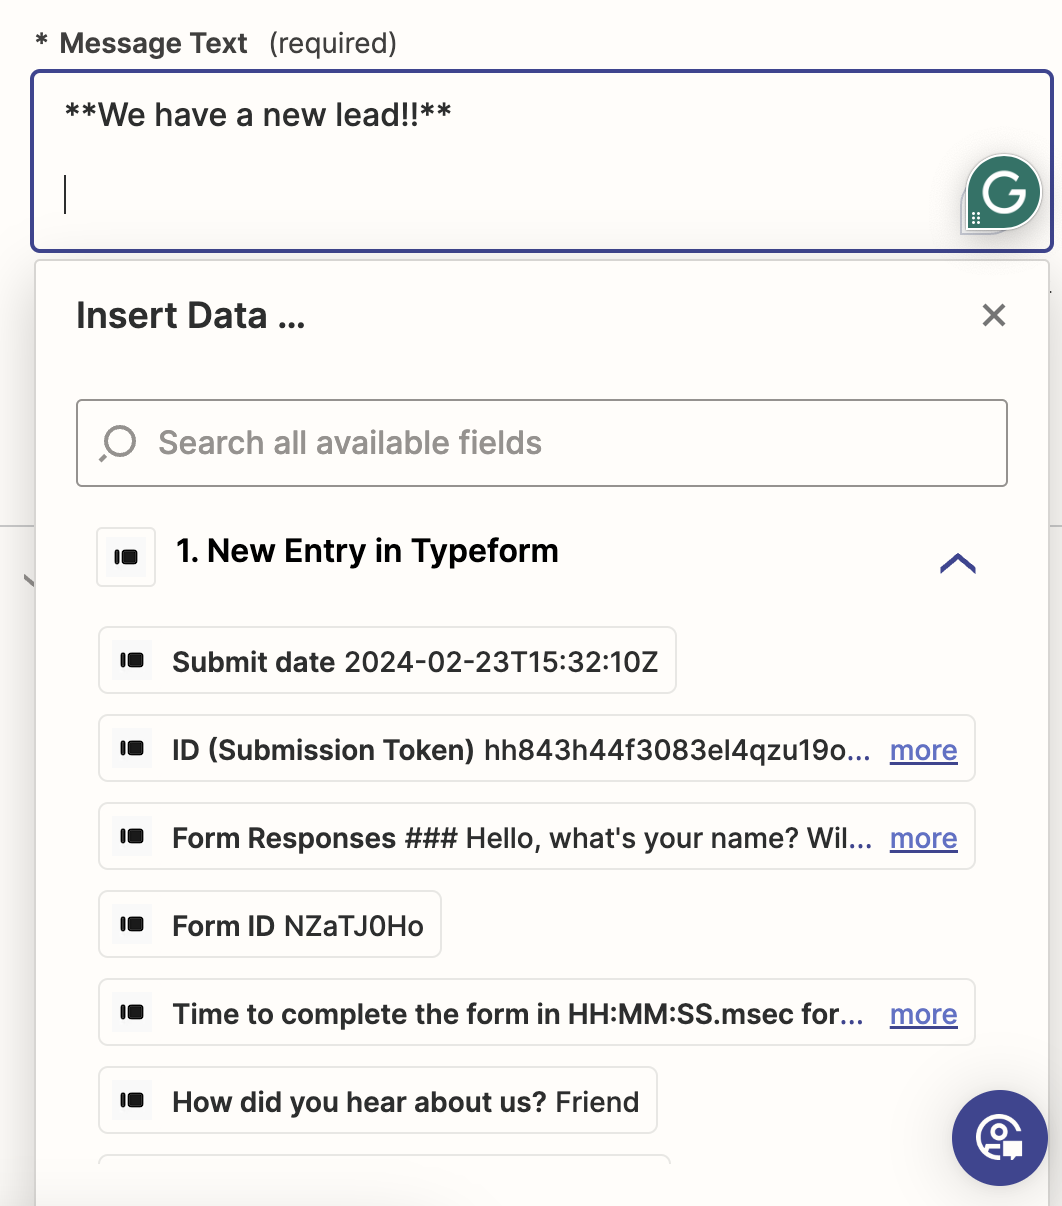 A screenshot of the data options from Typeform in the "Message Text" field of a Zapier action step.